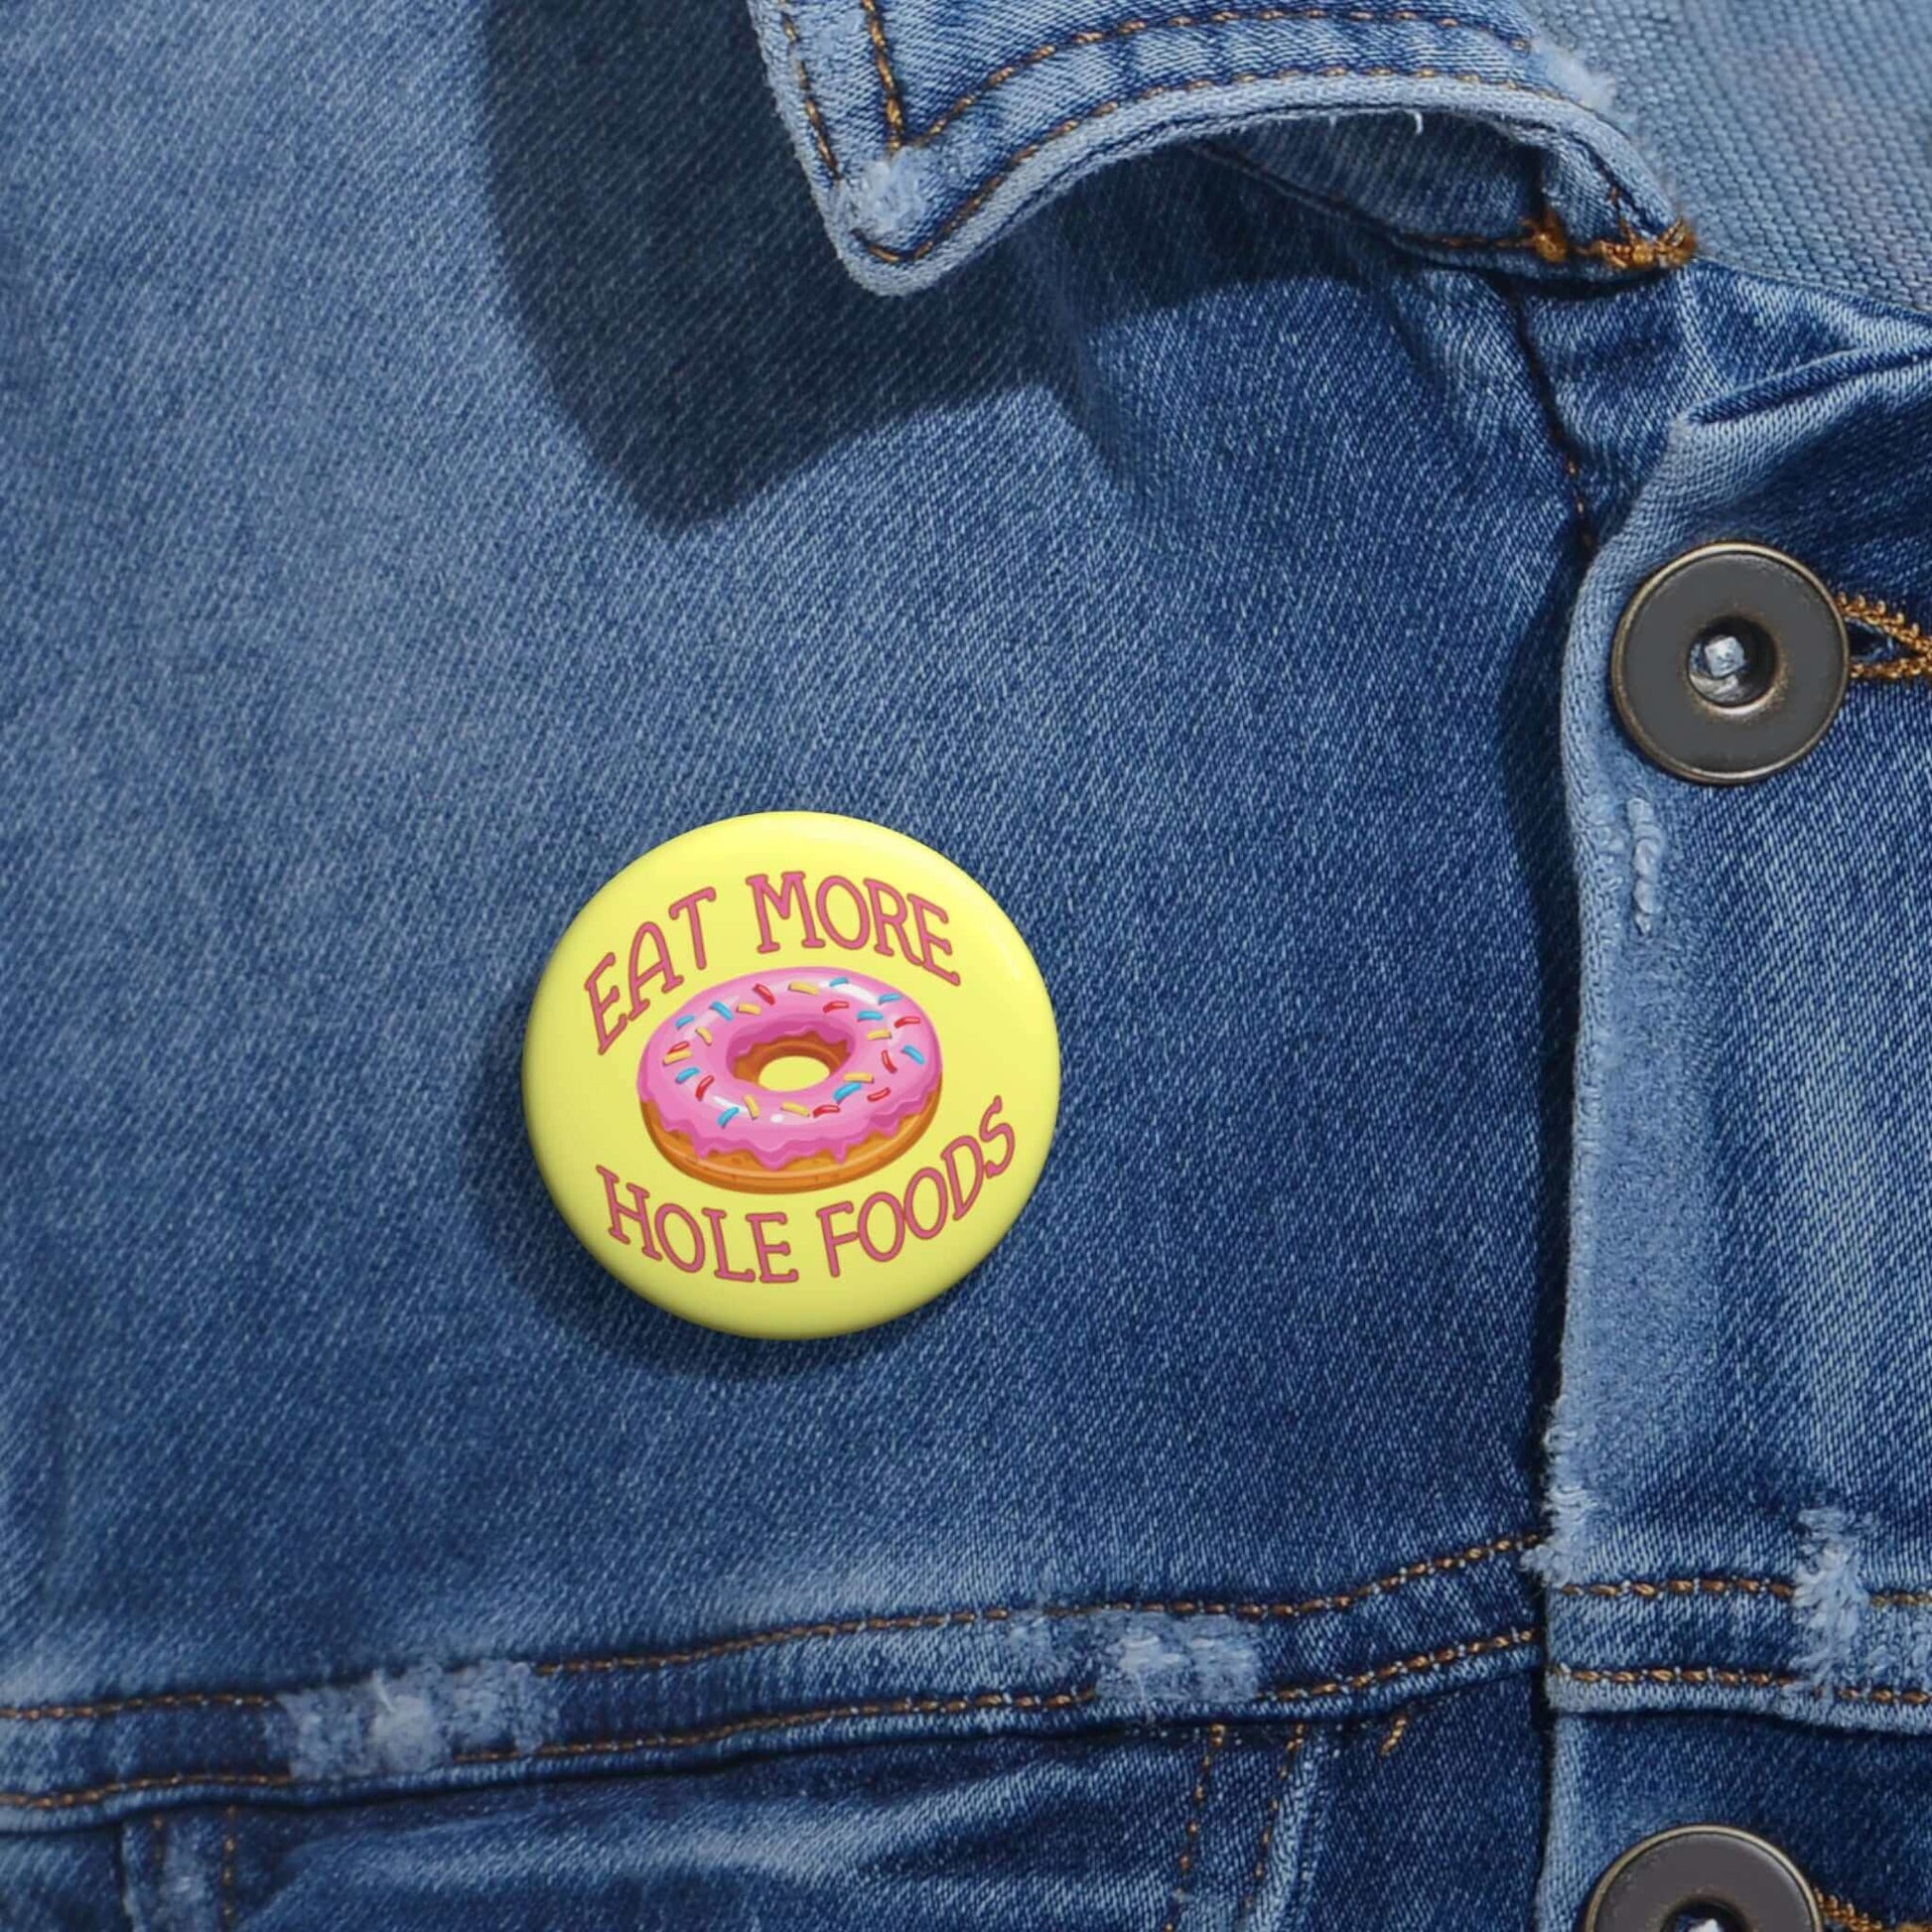 Funny donut pun pinback button with image of a donut with pink icing and sprinkles with the words Eat more hole foods.